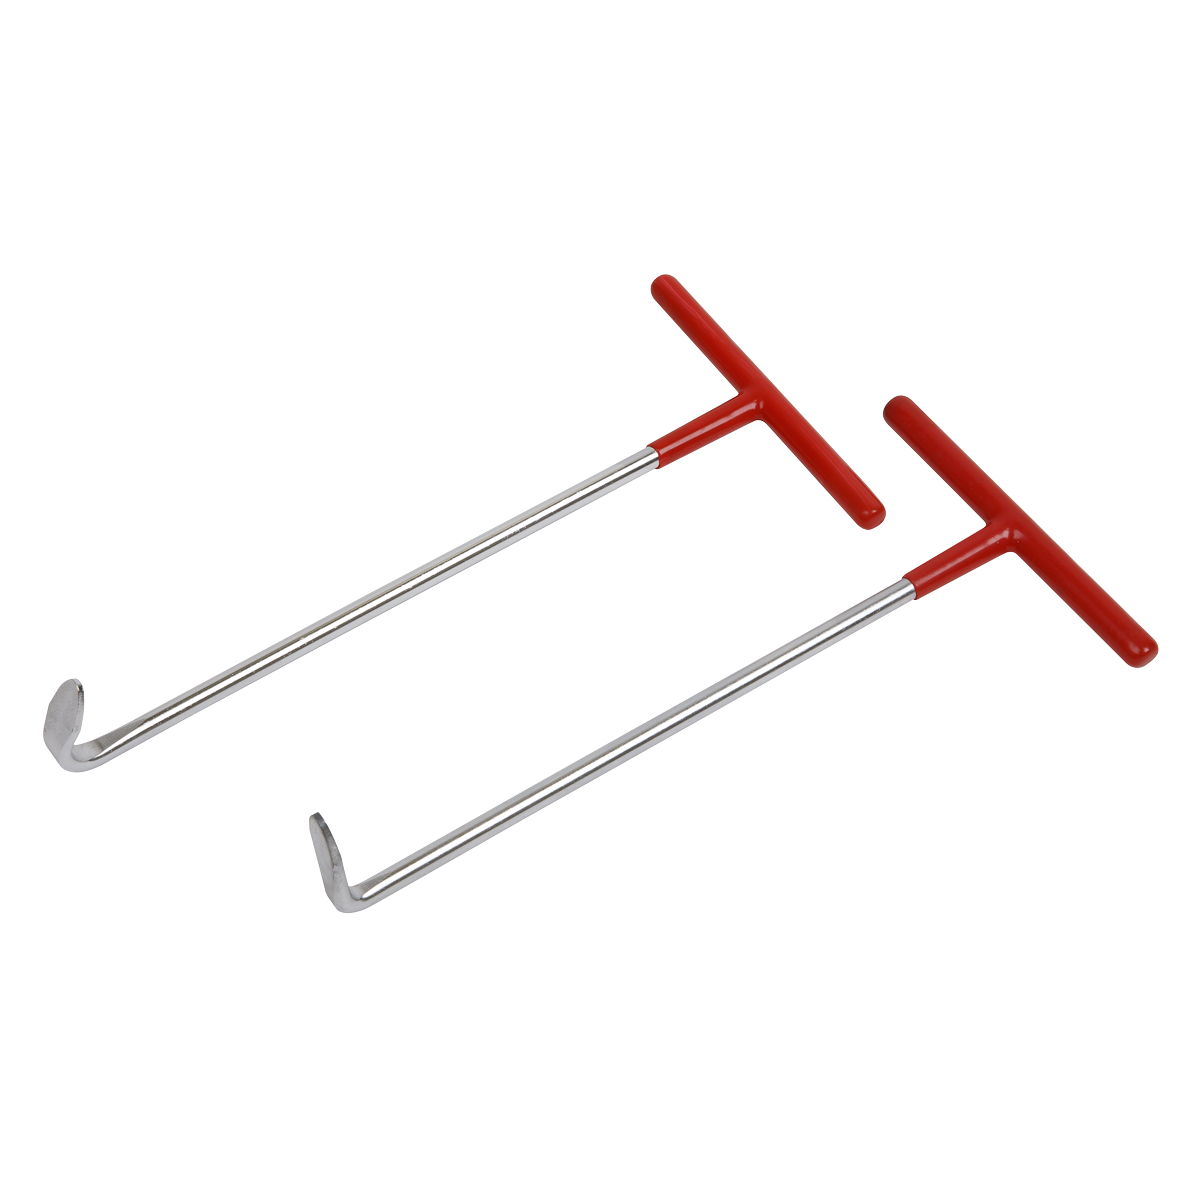 Sealey Exhaust Puller Tool Set 2pc